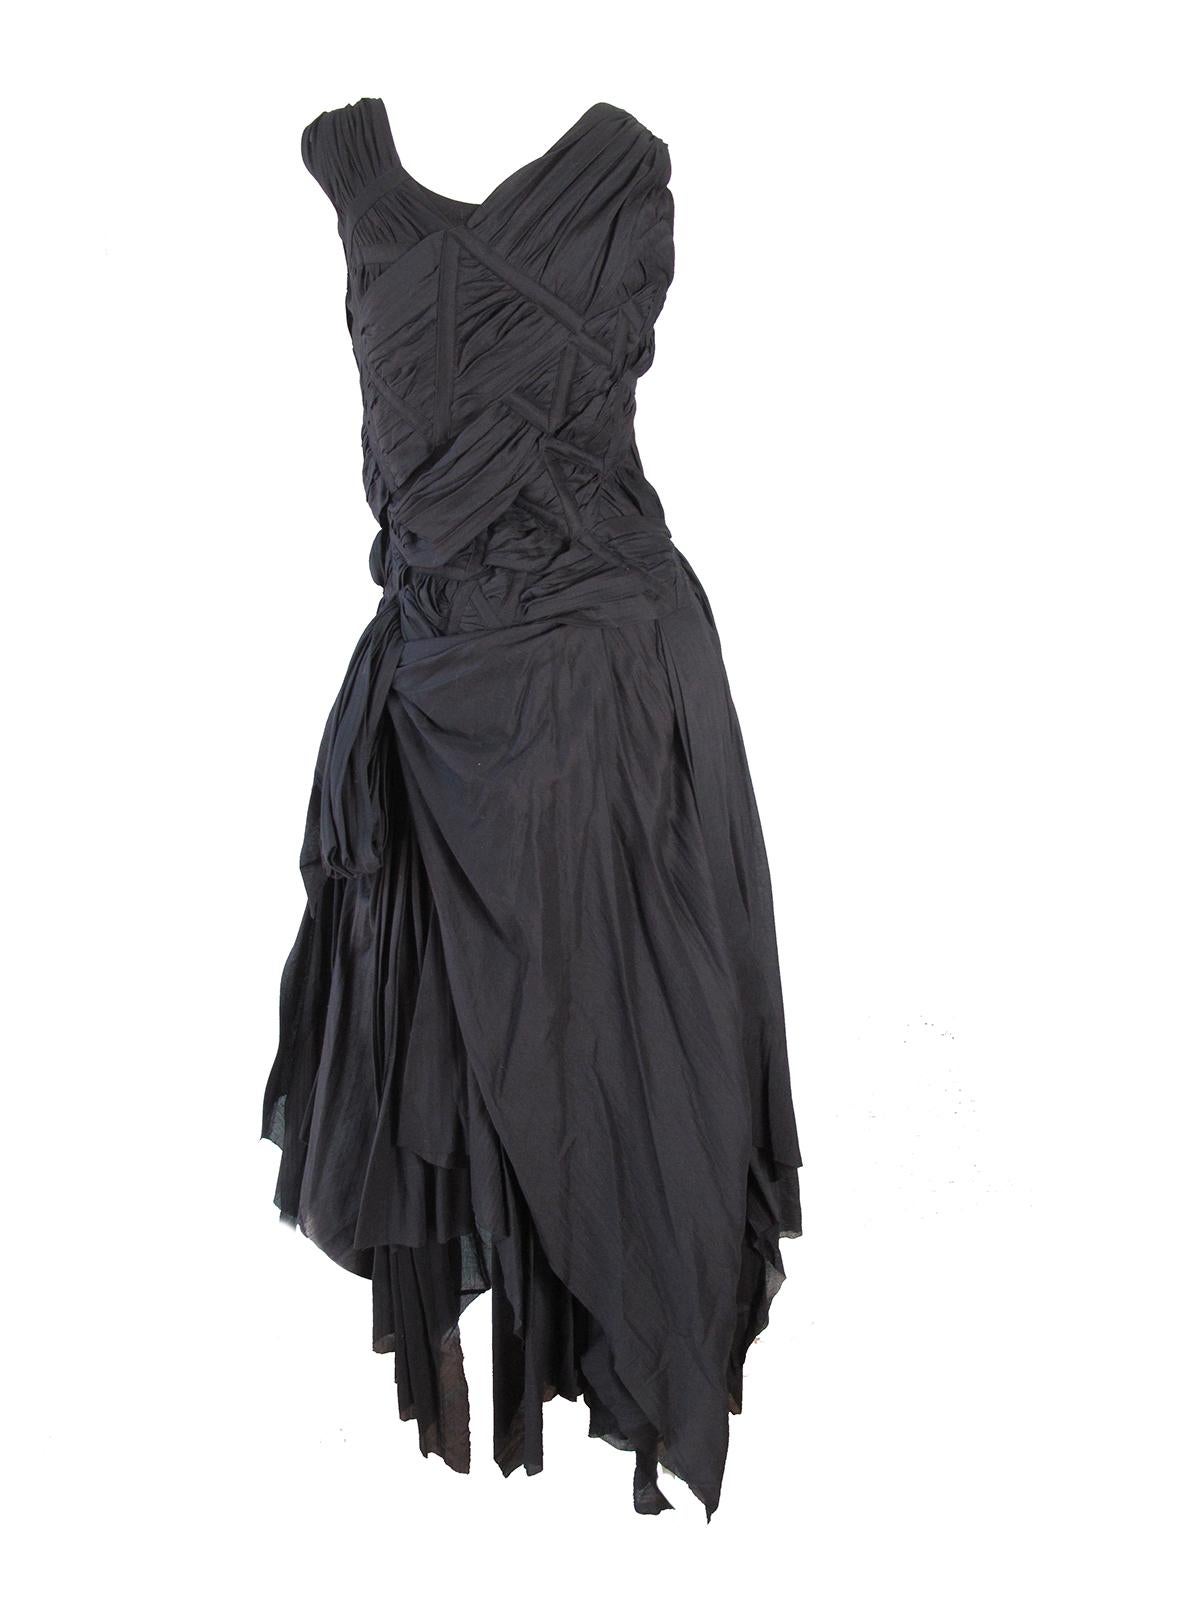 1990s Issey Miyake black cotton braided dress.  Made in Japan. Condition: Excellent. Yohji Size 2 ( or Medium )
